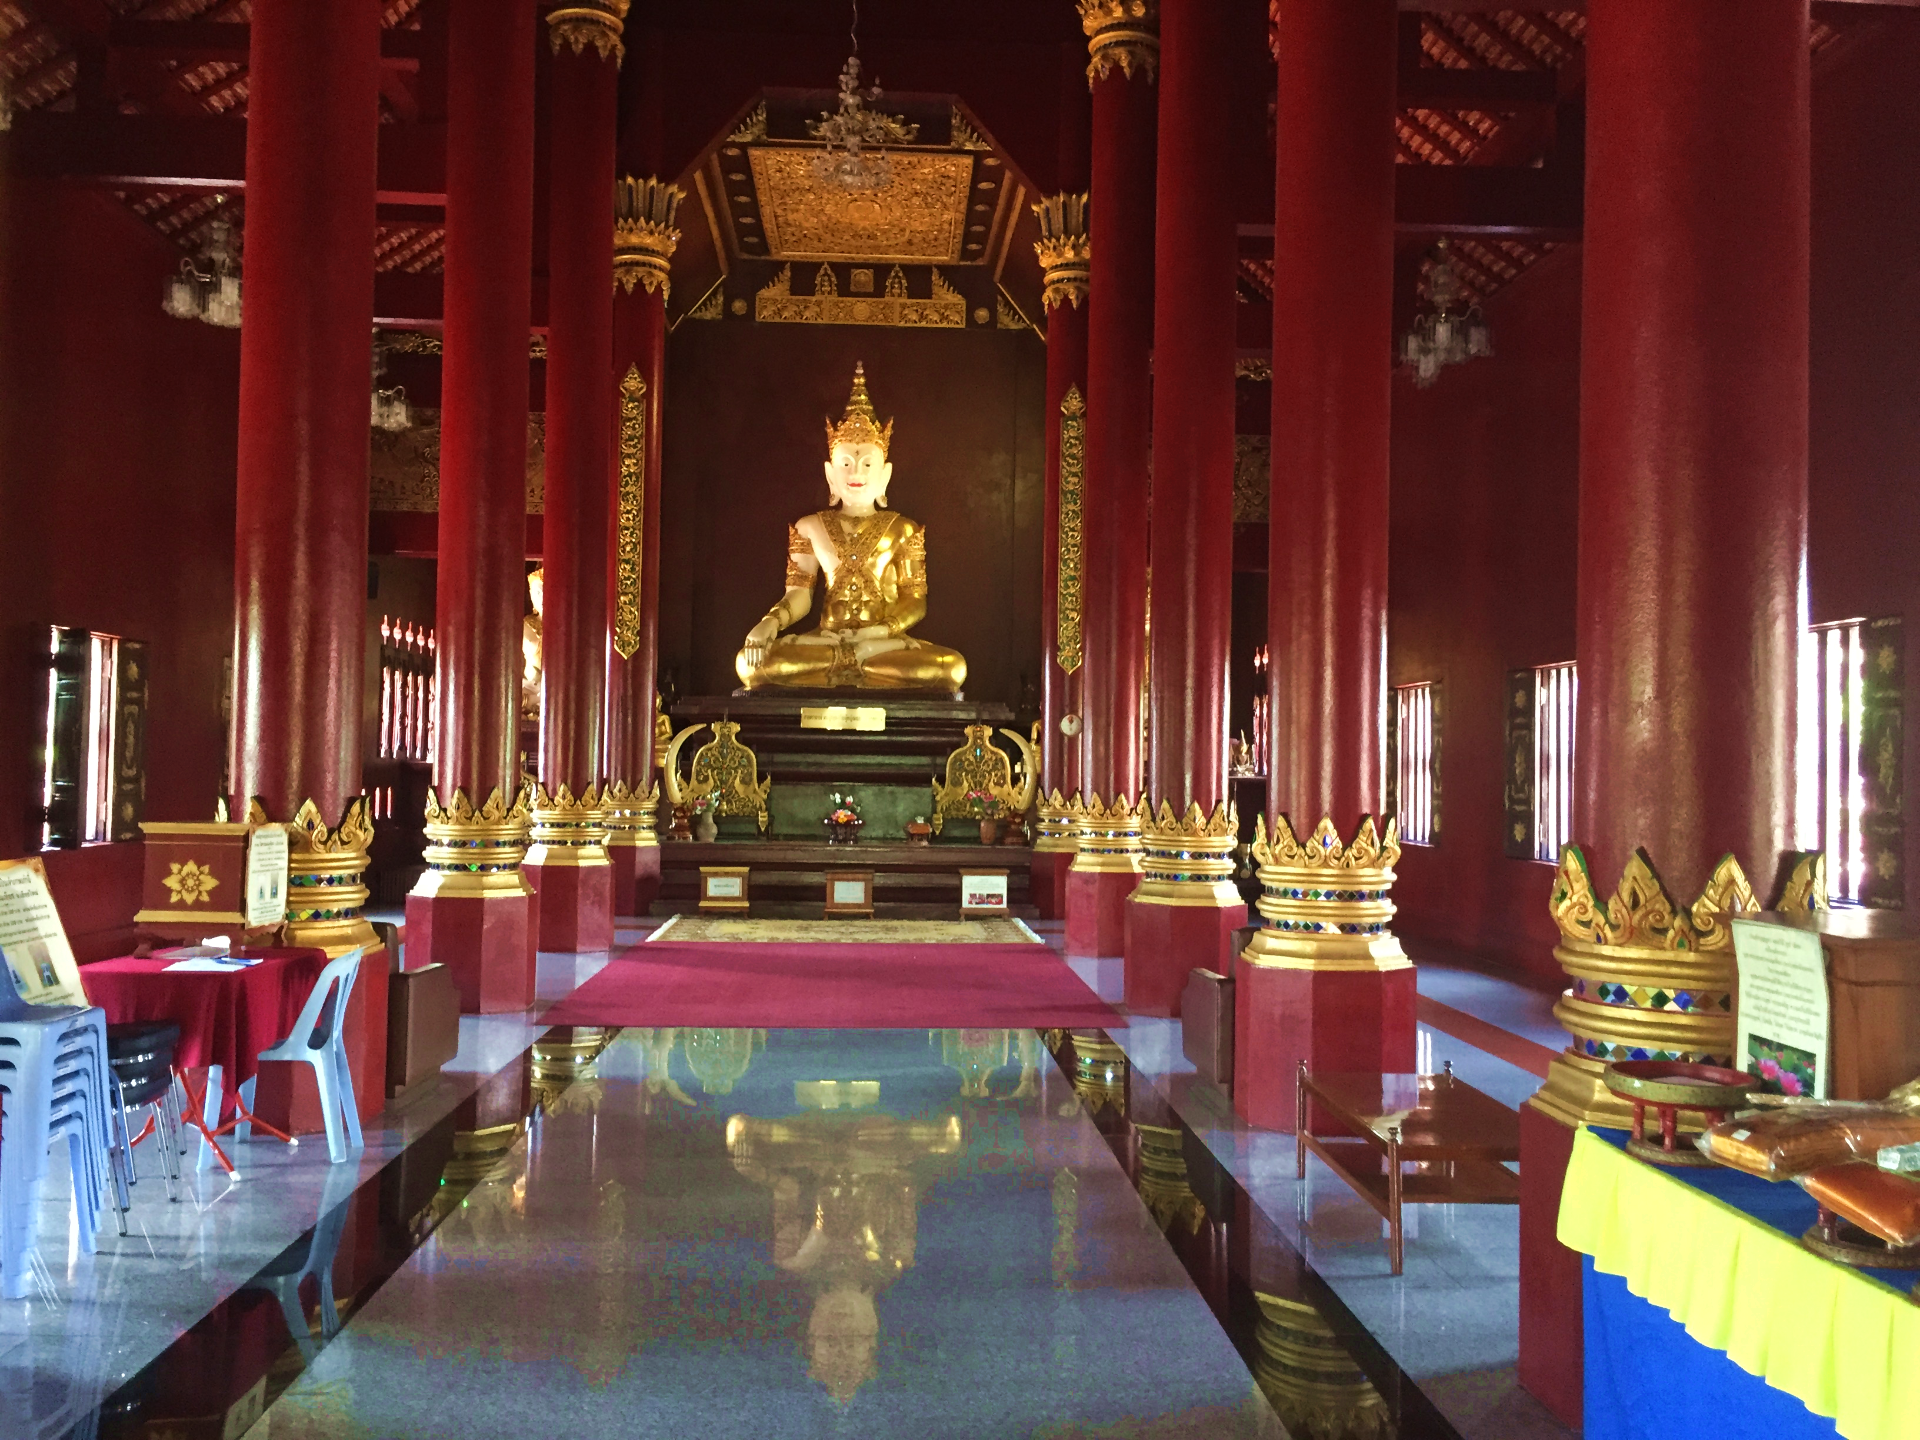 The special interior of Wat Monthian with its red and golden columns and a buddha statue